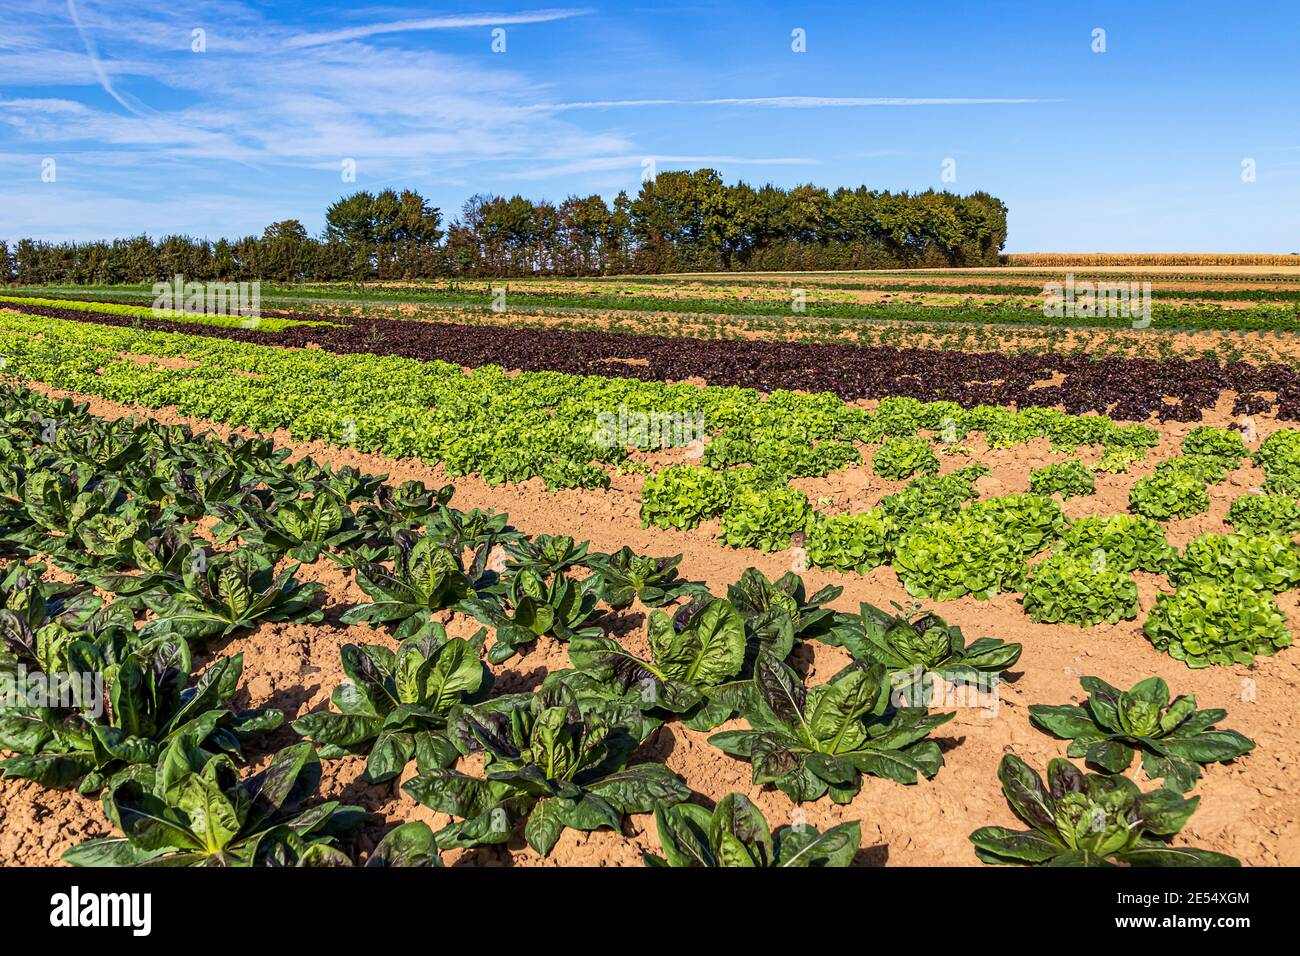 Rows of various lettuce plants growing in a vegetable field. Organic farming in Germany. Stock Photo